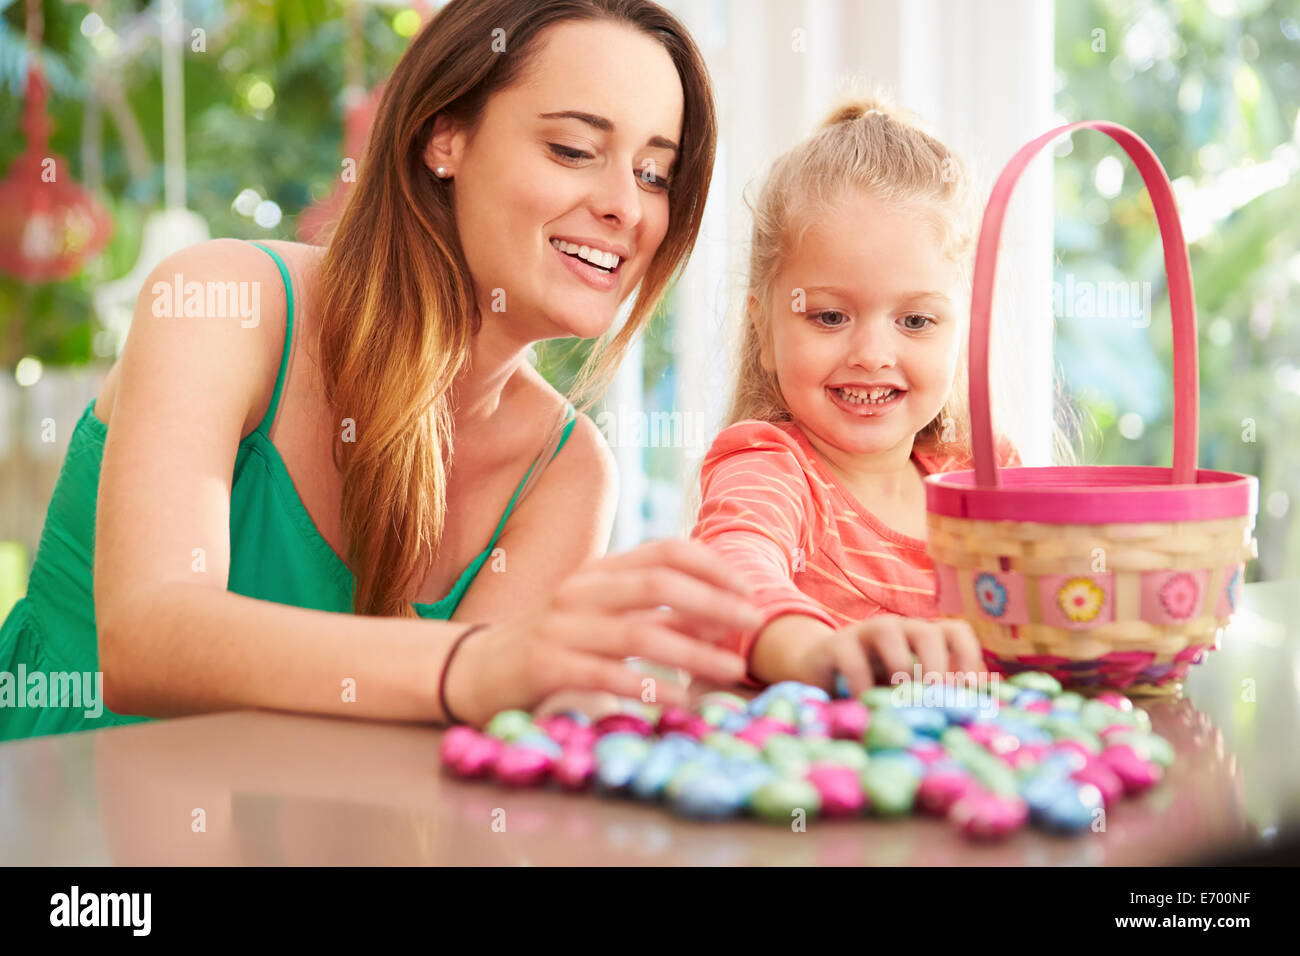 Mother And Daughter With Chocolate Easter Eggs And Basket Stock Photo